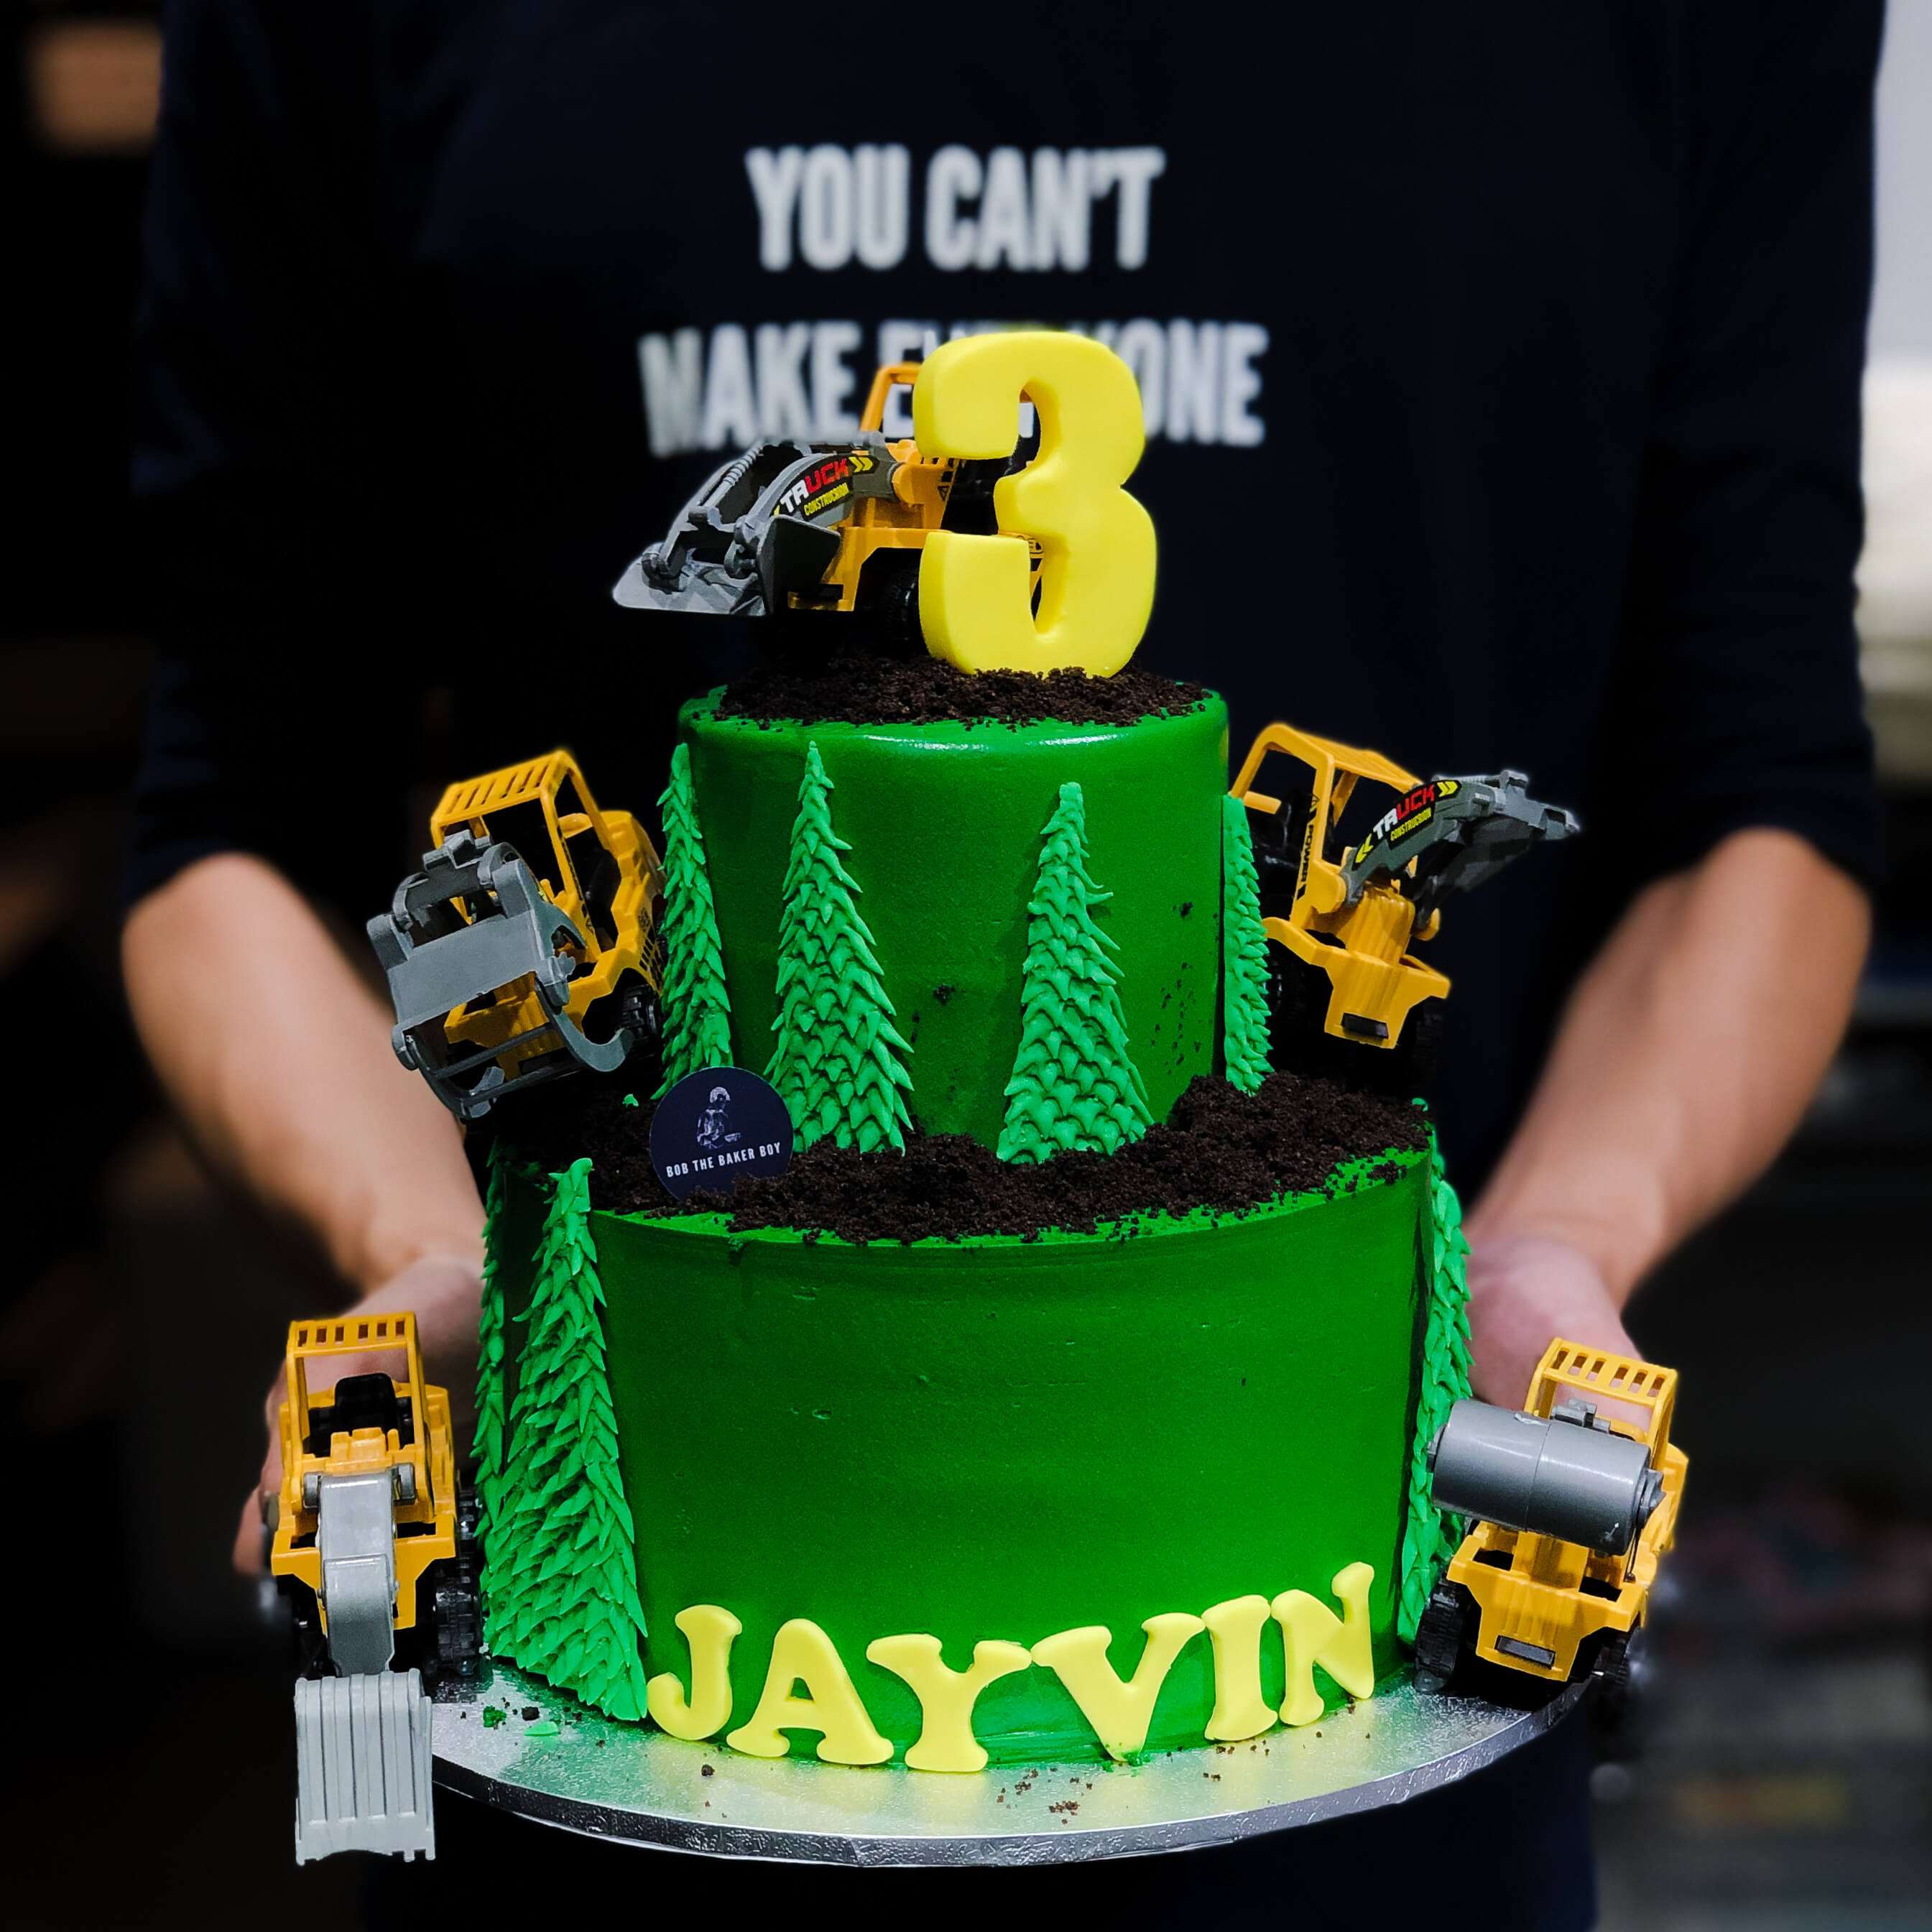 Construction Cake in the Greens